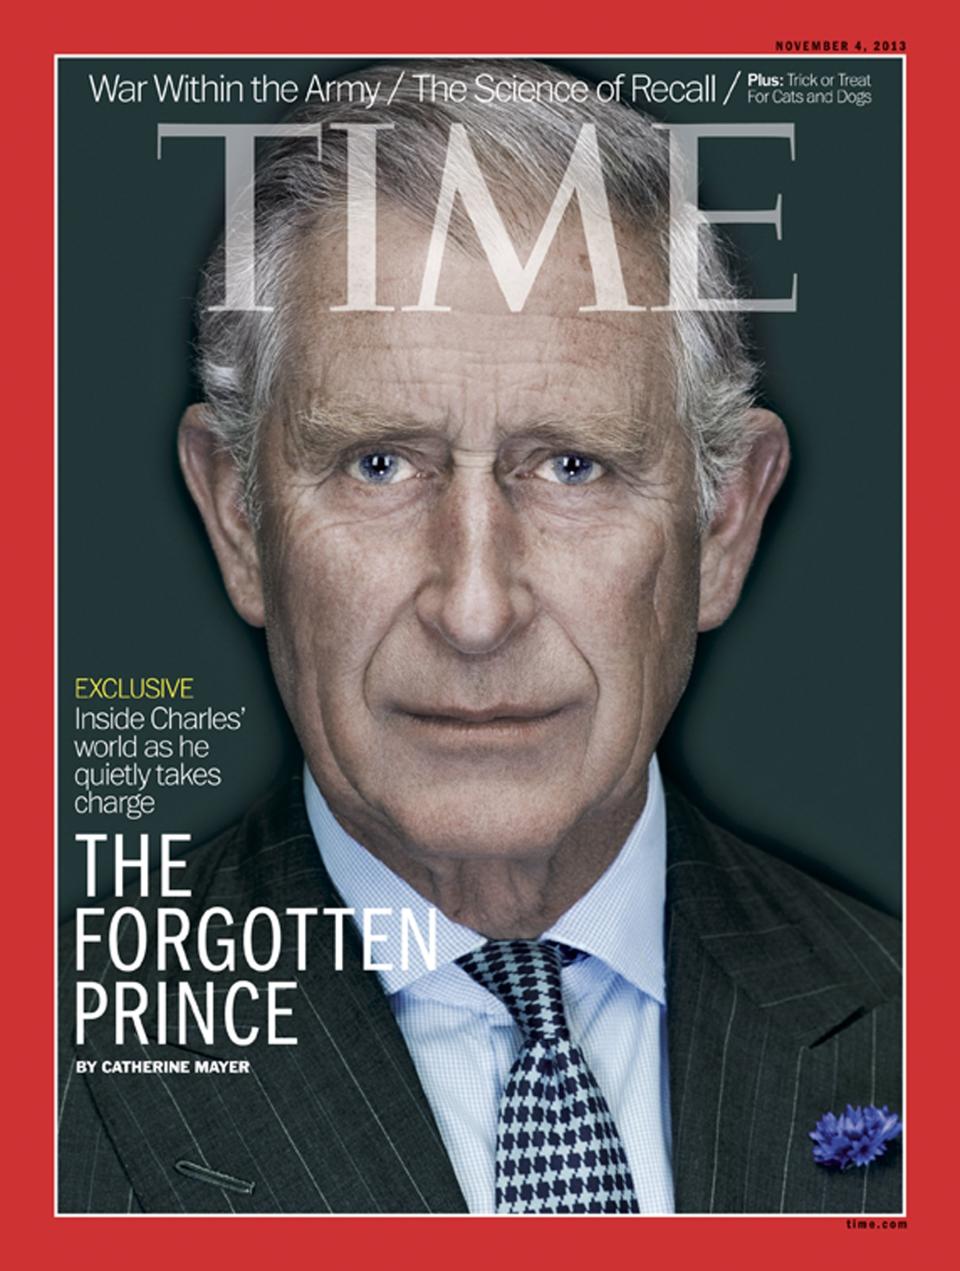 Prince Charles on the front cover of November 2013 issue of TIME magazine